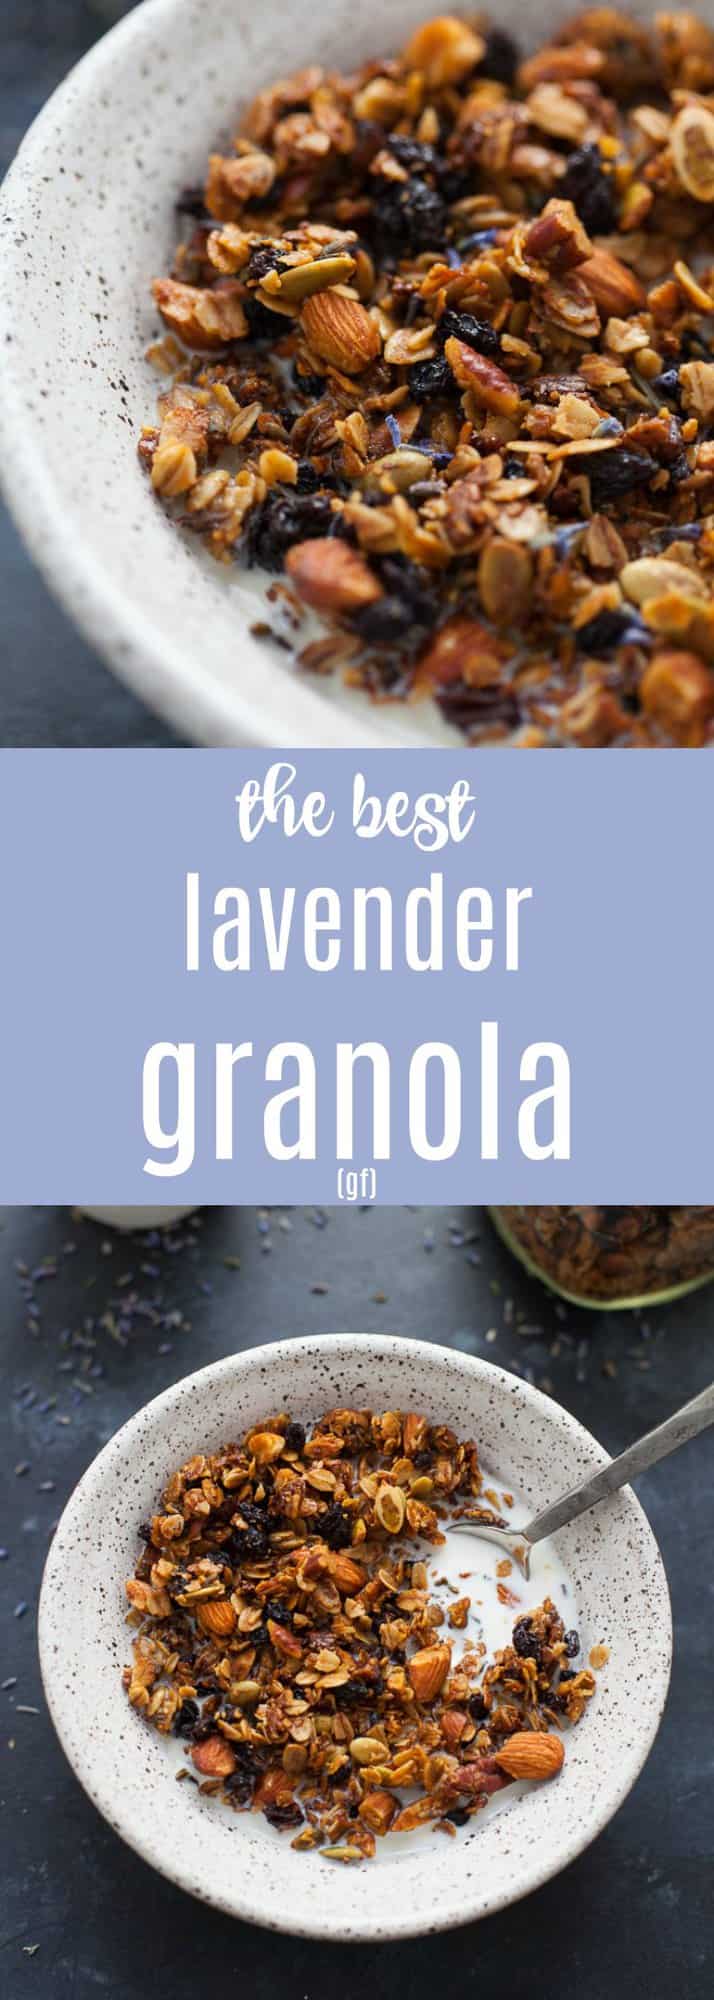 Floral and reminiscent of springlike temps that are hopefully on their way, this lavender granola is perfect paired with milk, yogurt, or just eaten straight out of the jar!